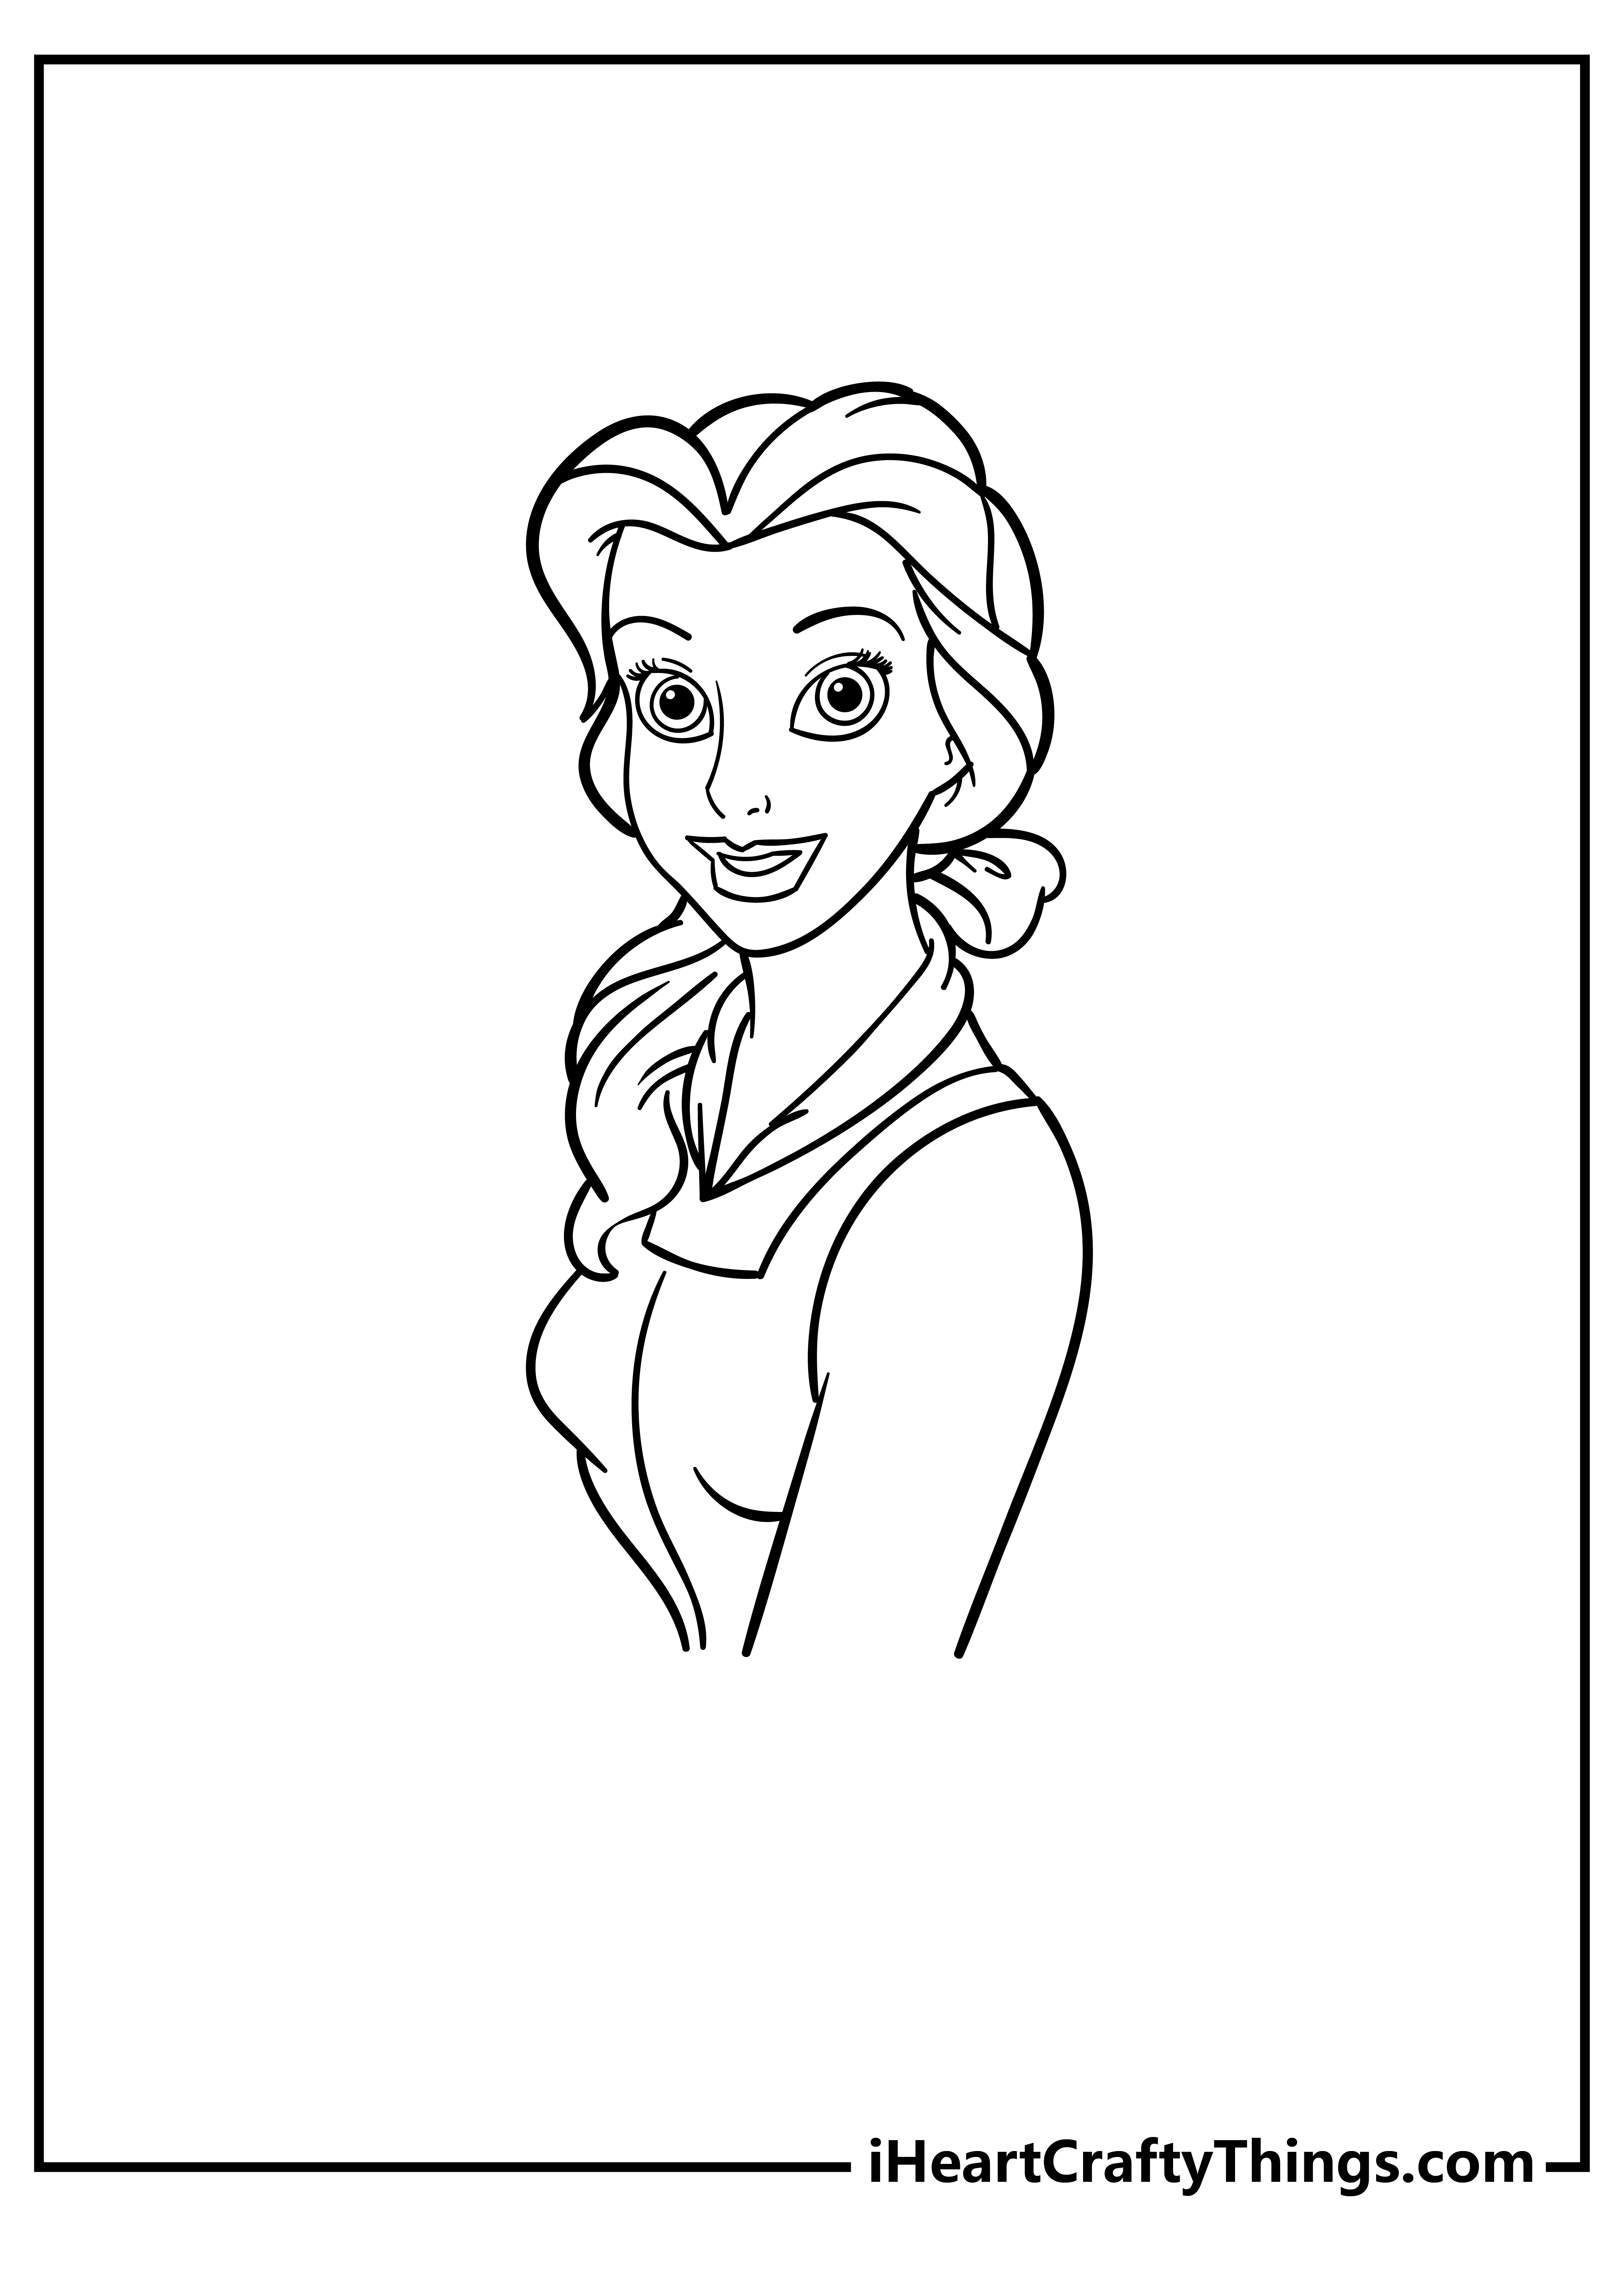 Beauty and the Beast Coloring Pages for kids free download